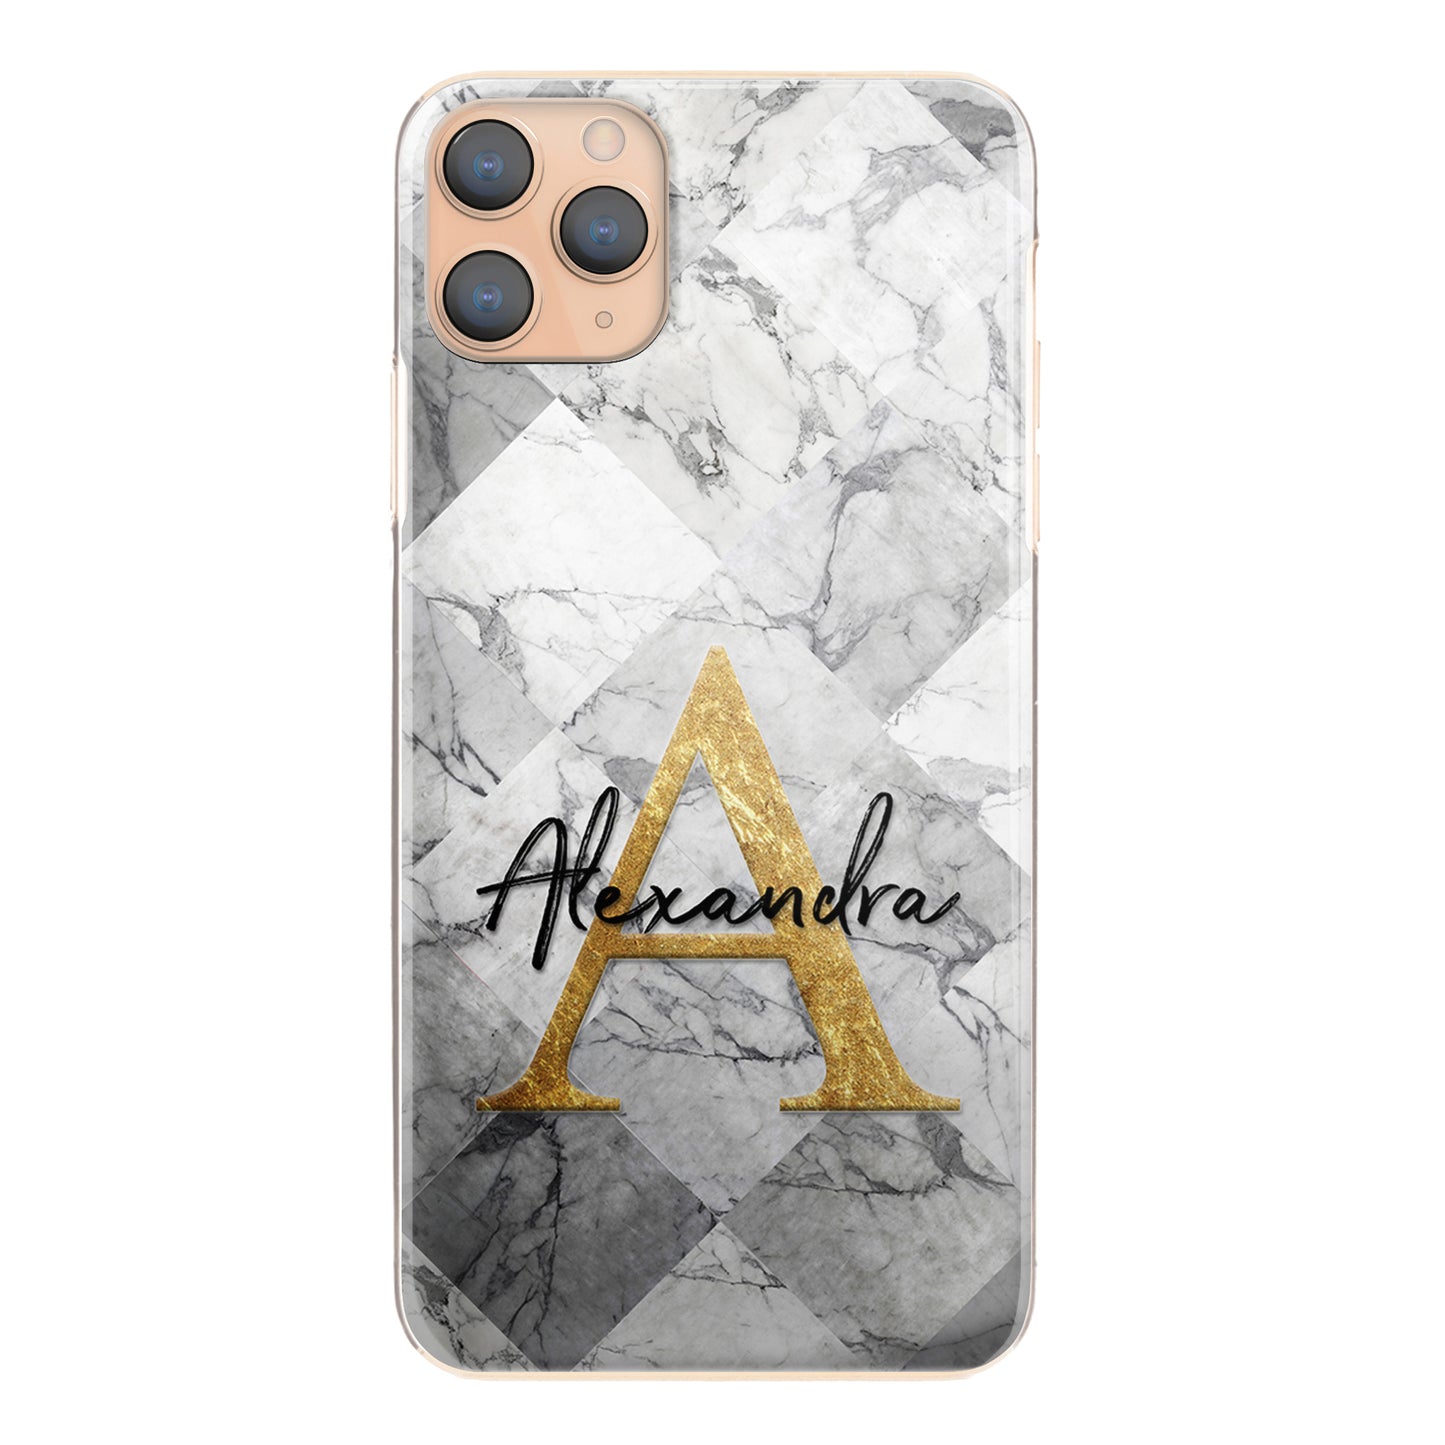 Personalised Samsung Galaxy Phone Hard Case with Gold Monogram and Stylish Text on Patterned Grey Marble